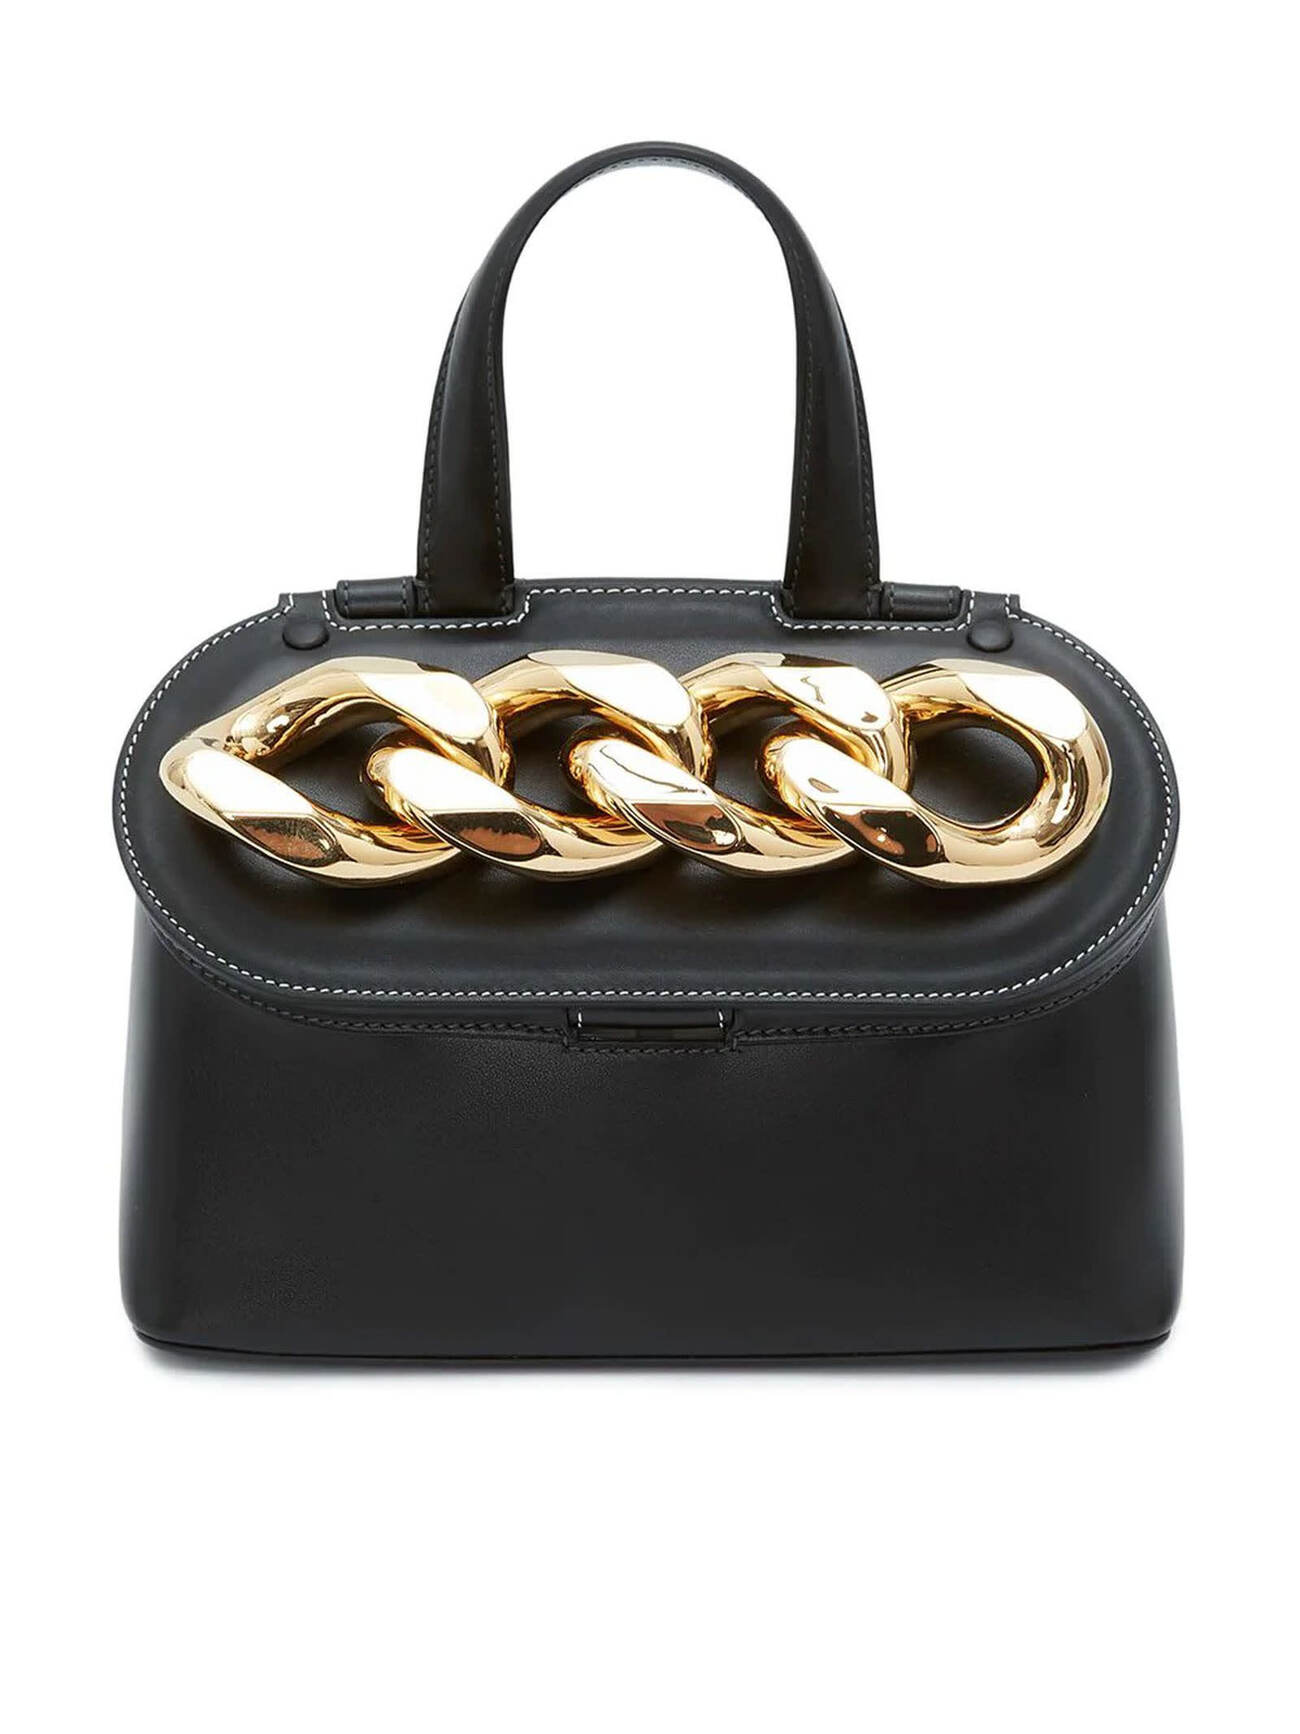 J.W. Anderson Black Leather Chain Lid Bag in nero